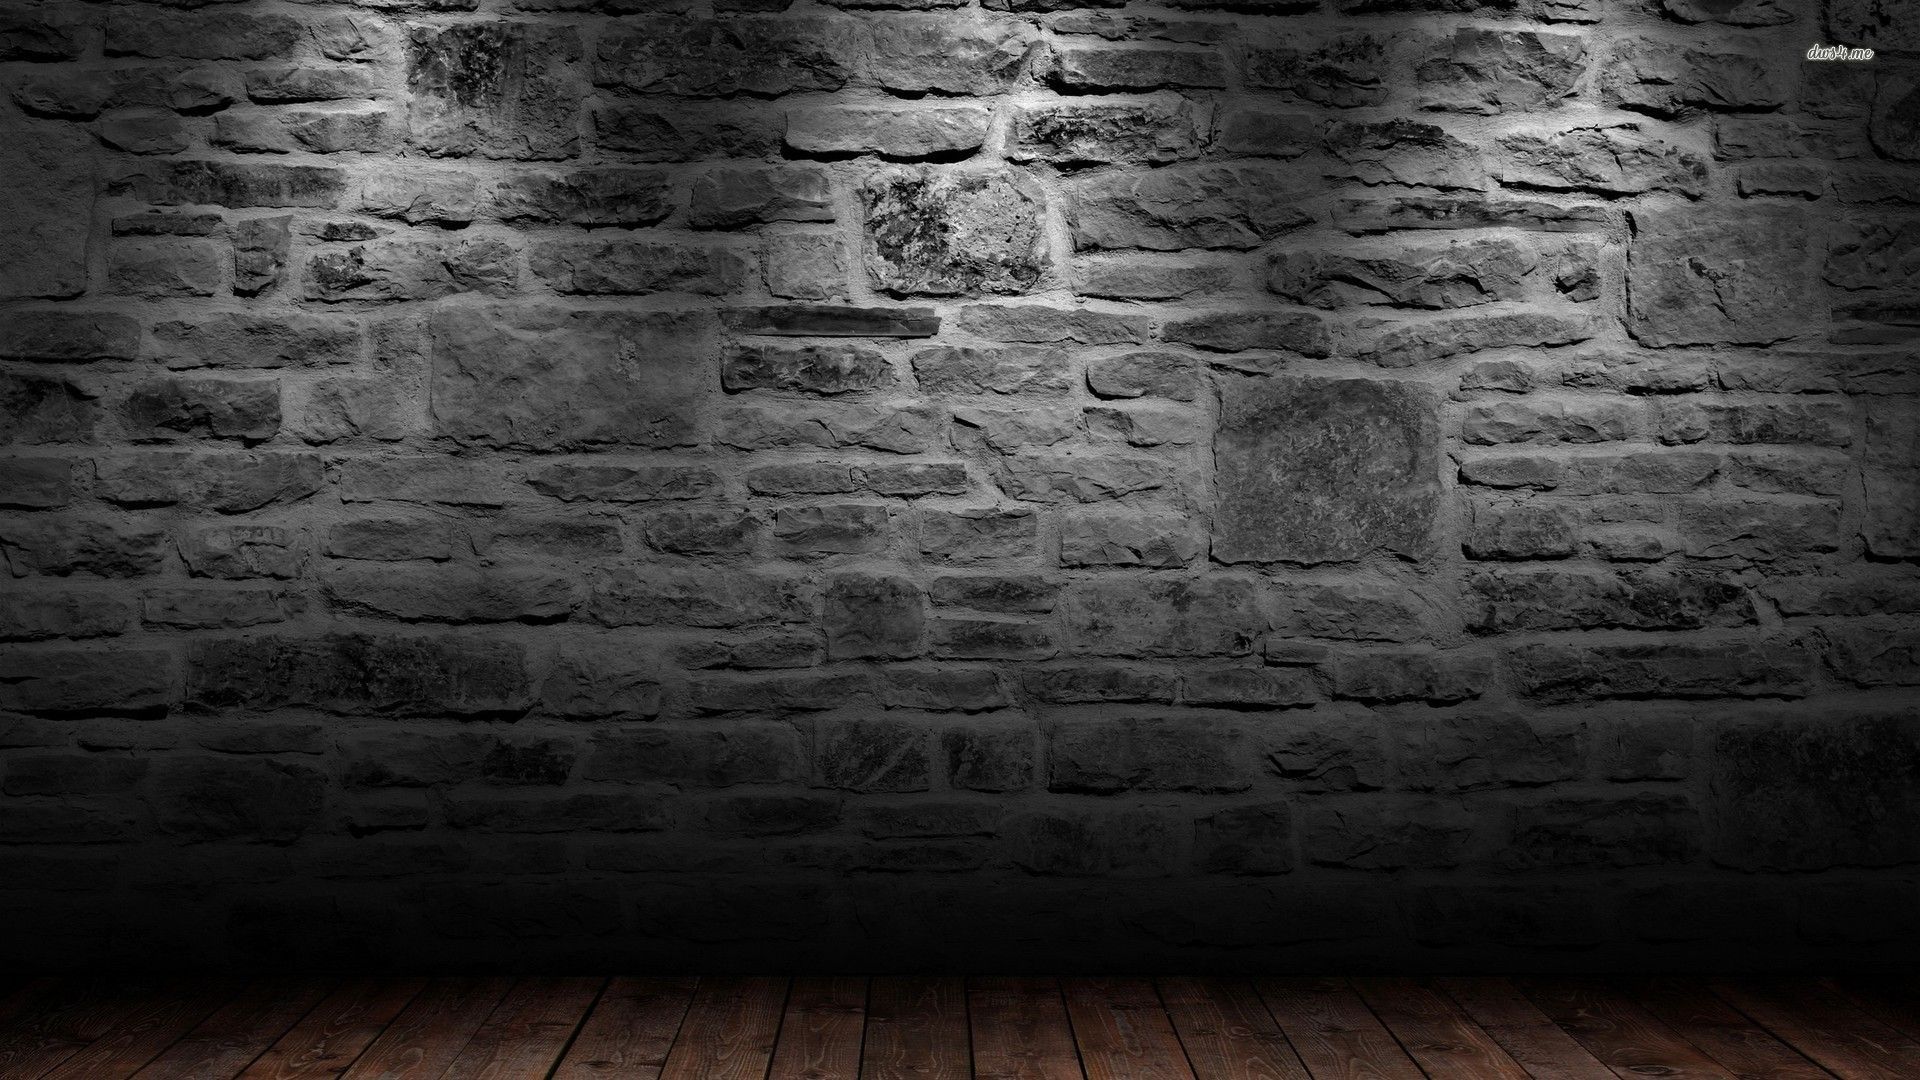 40 HD Brick Wallpapers/Backgrounds For Free Download